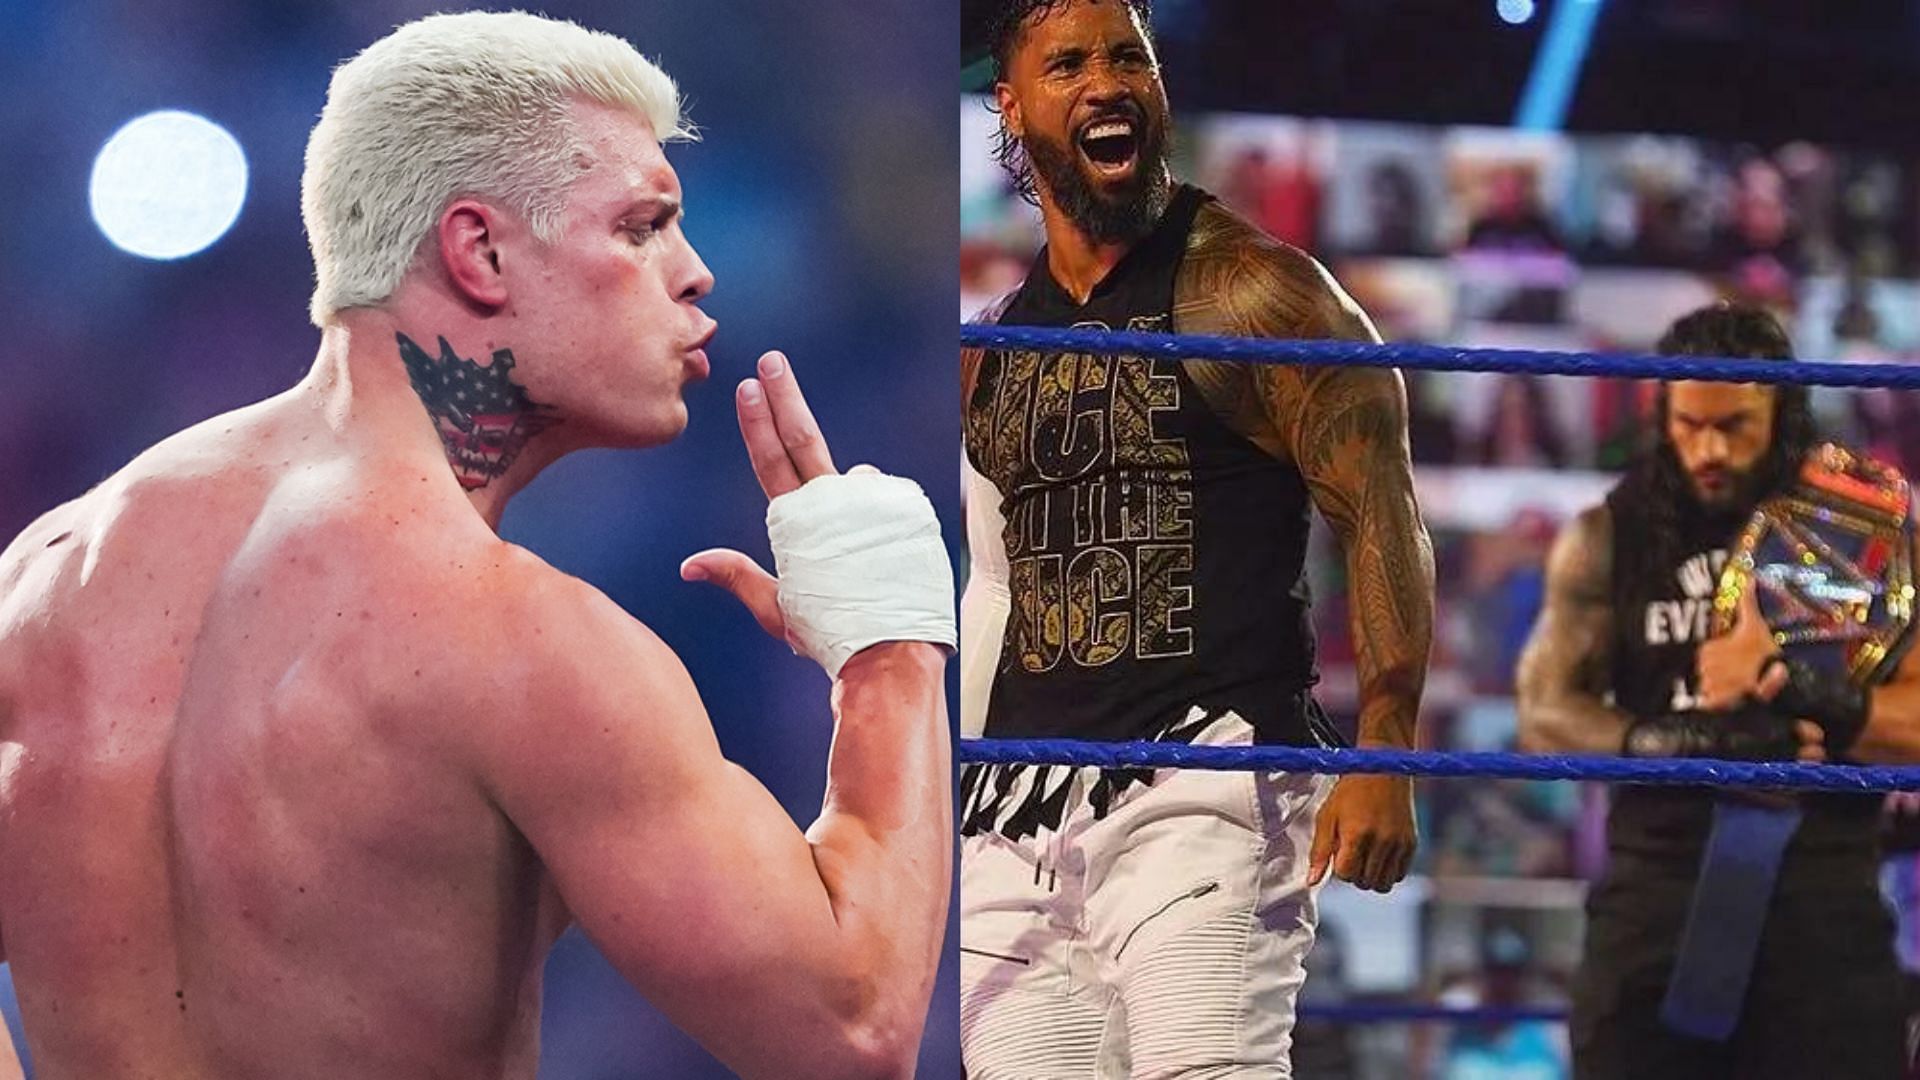 Cody Rhodes has formed an alliance with Jey Uso